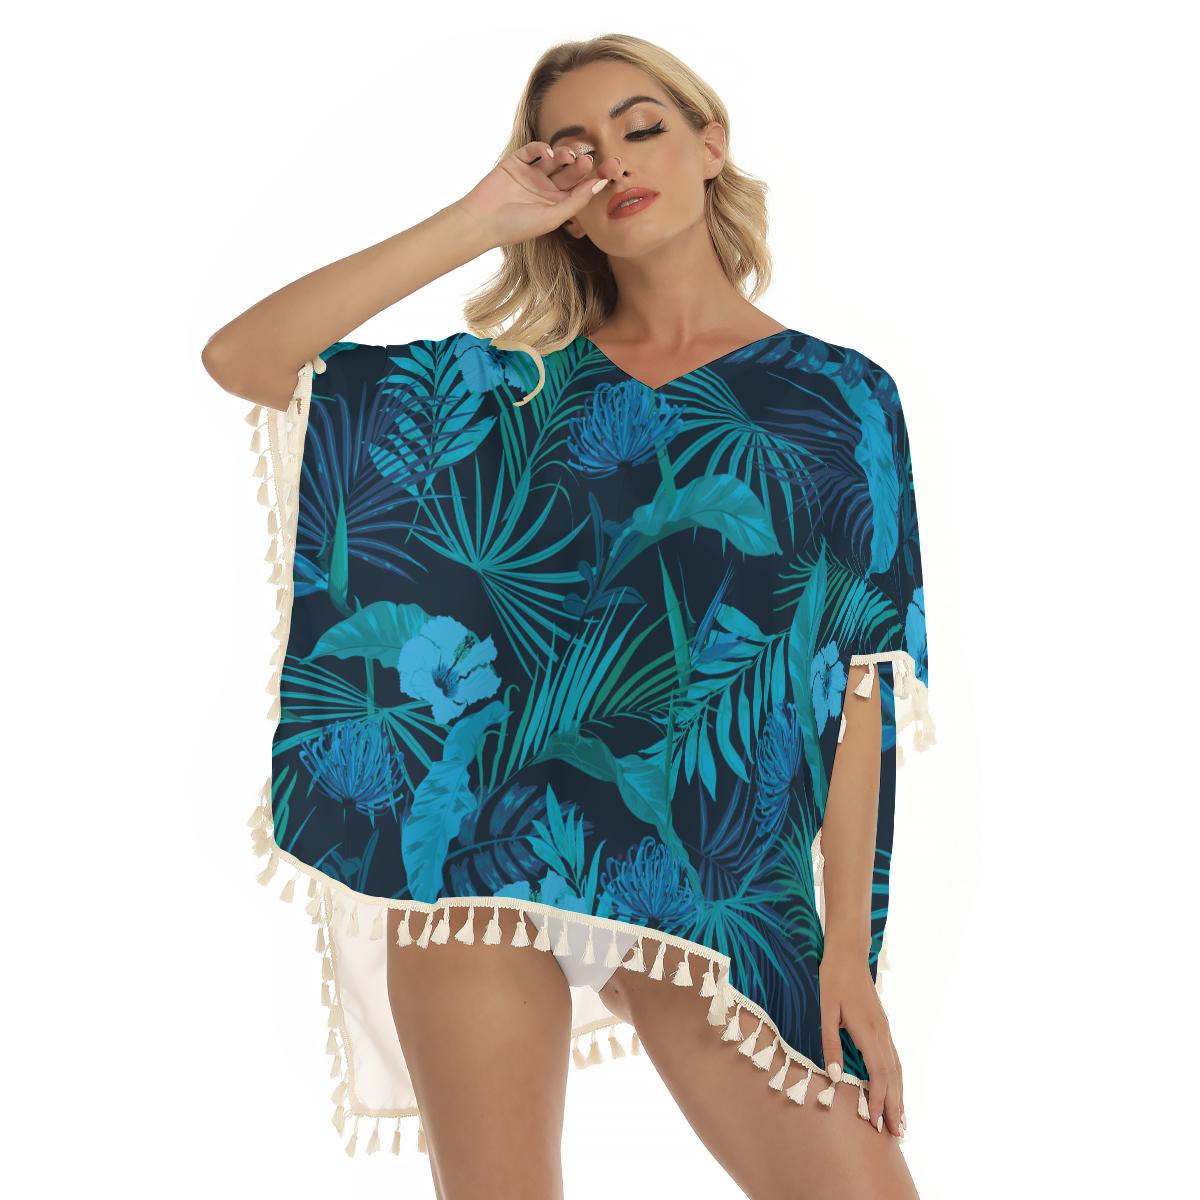 Blue Tropical Palm Leaves Beach Floral Flowers Print Women's Square Fringed Shawl, Bikini Cover Up